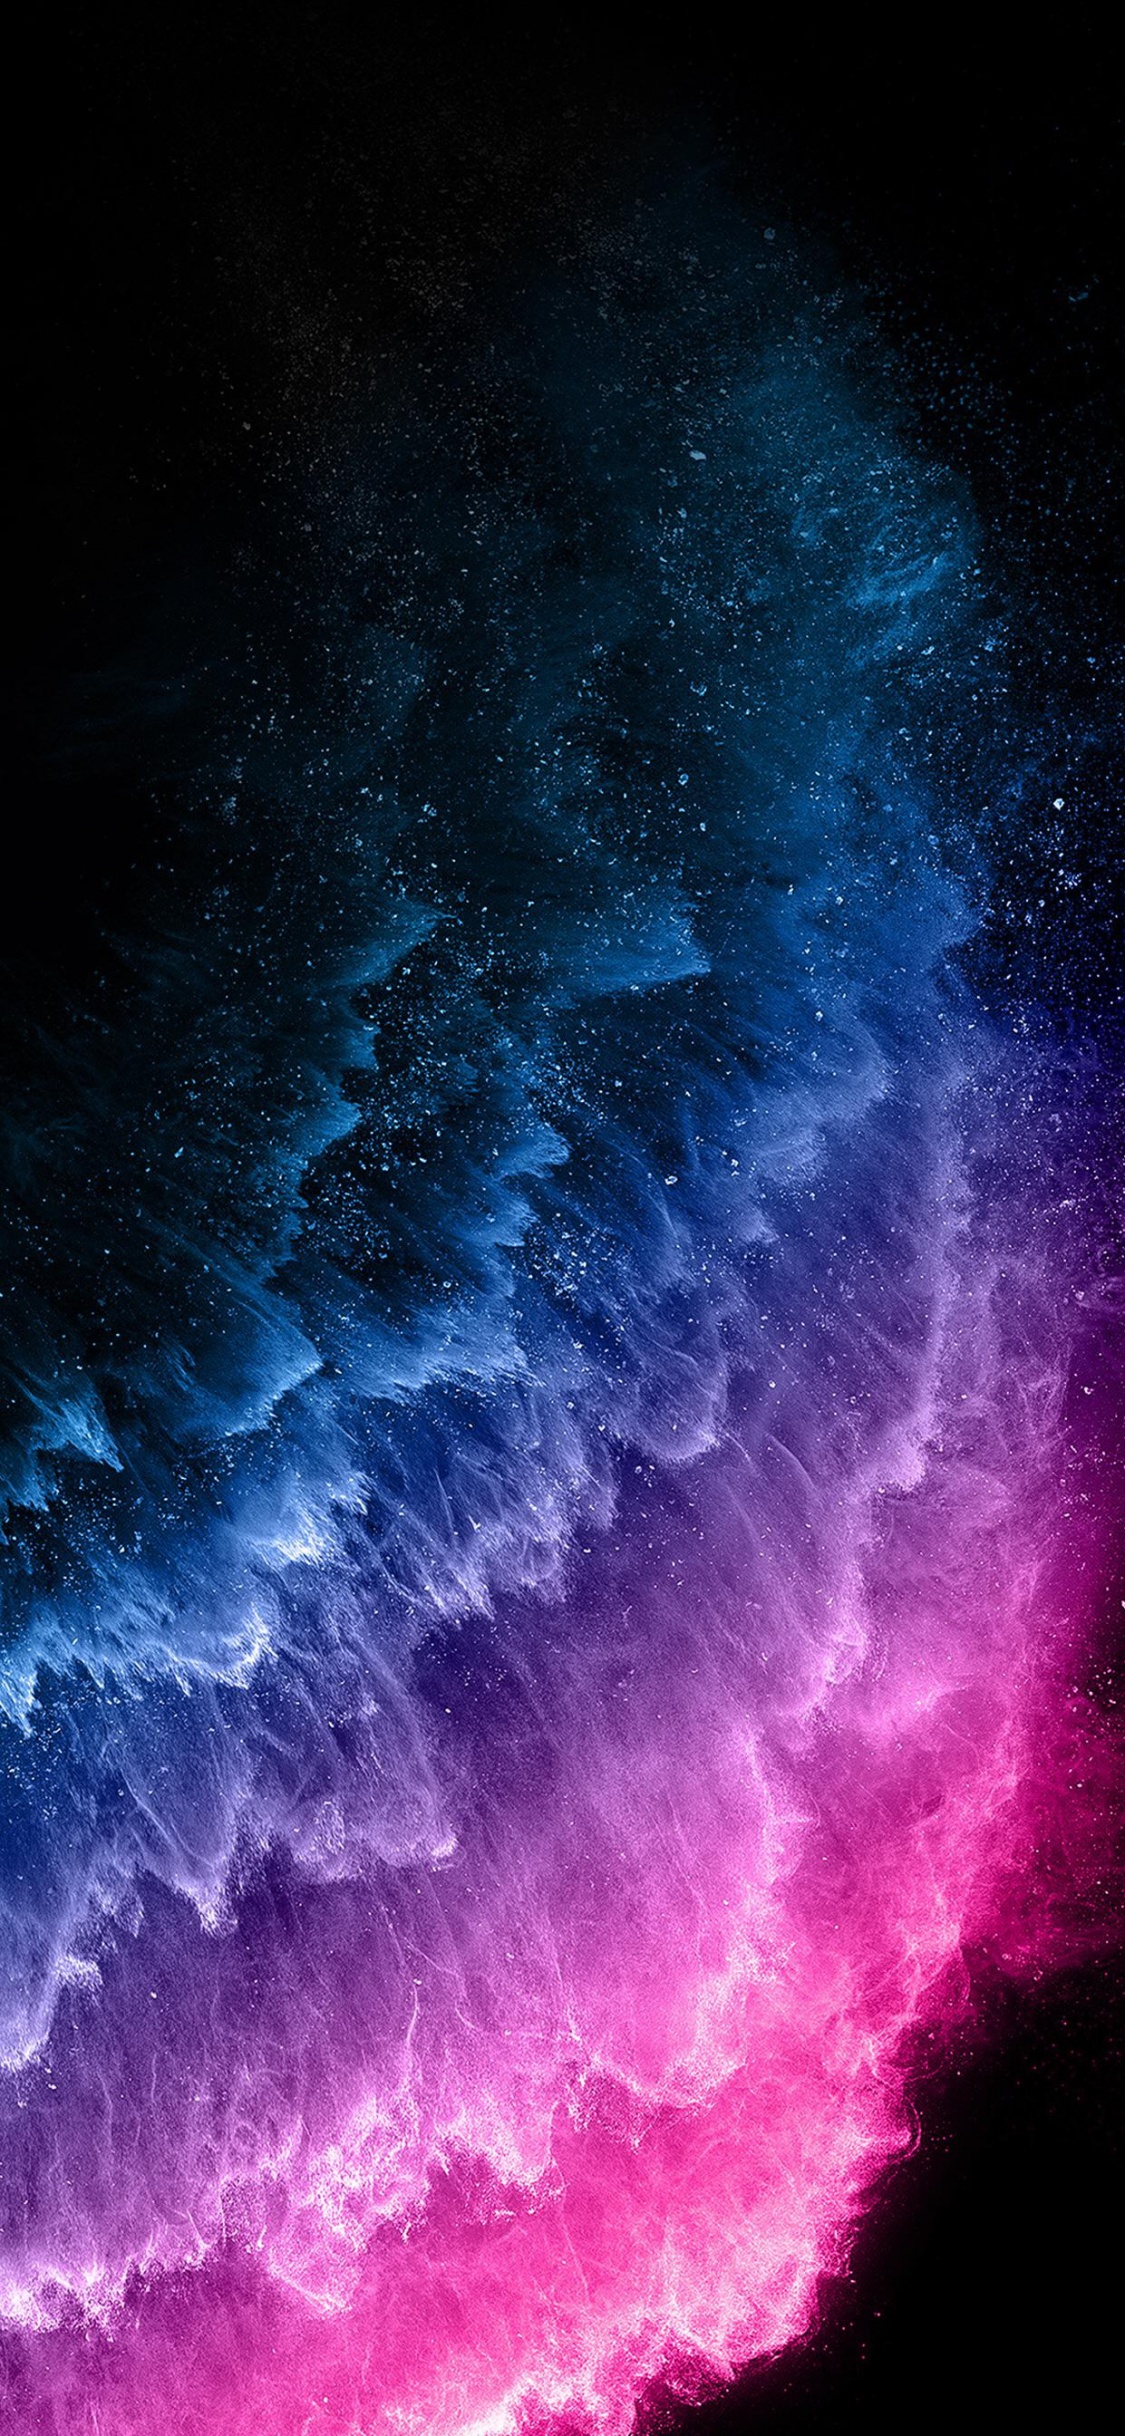 IOS 11, Apples, Android, Ios, Atmosphere. Wallpaper in 1125x2436 Resolution